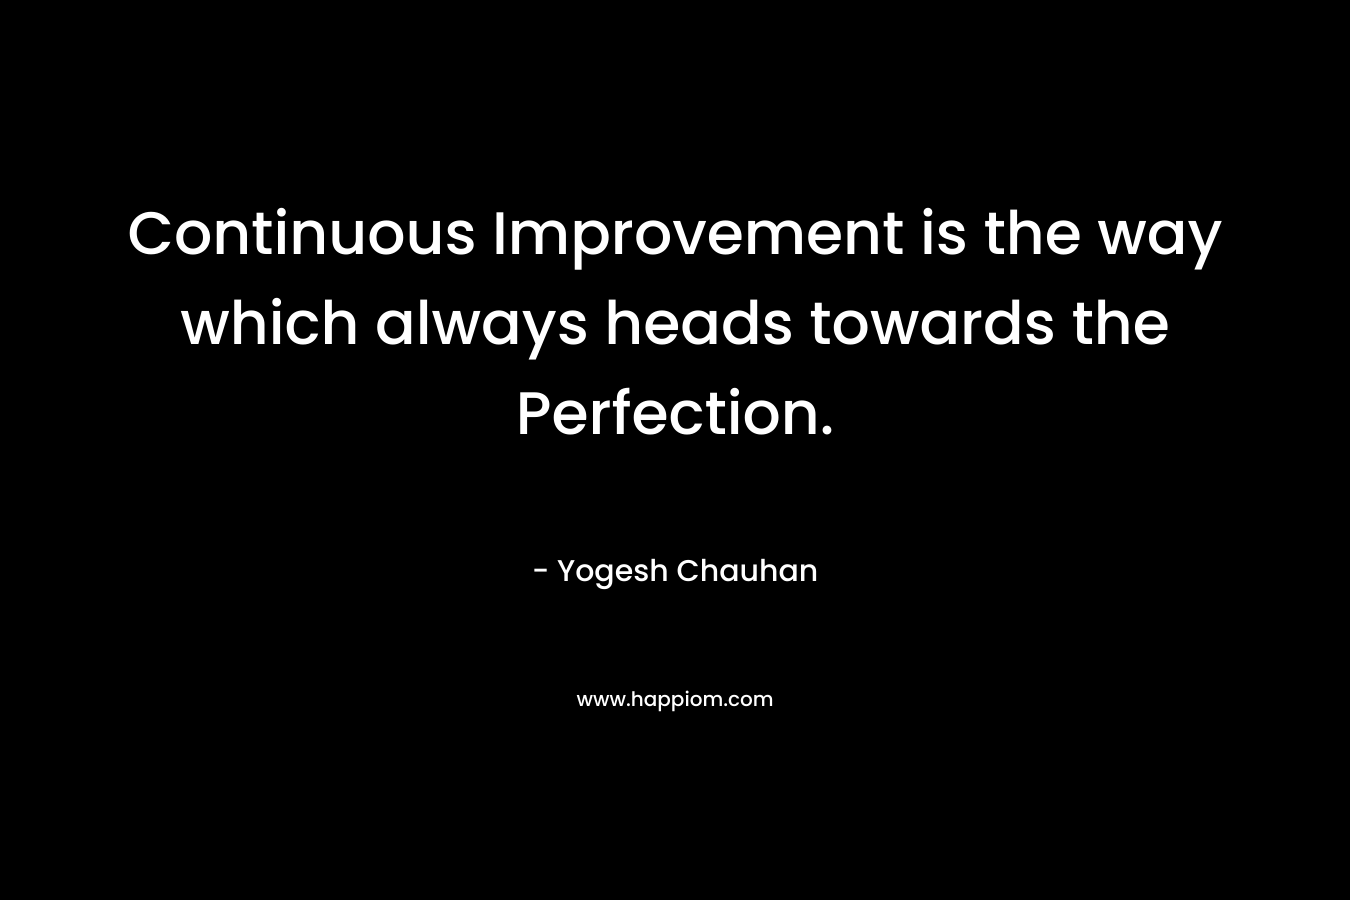 Continuous Improvement is the way which always heads towards the Perfection. – Yogesh Chauhan